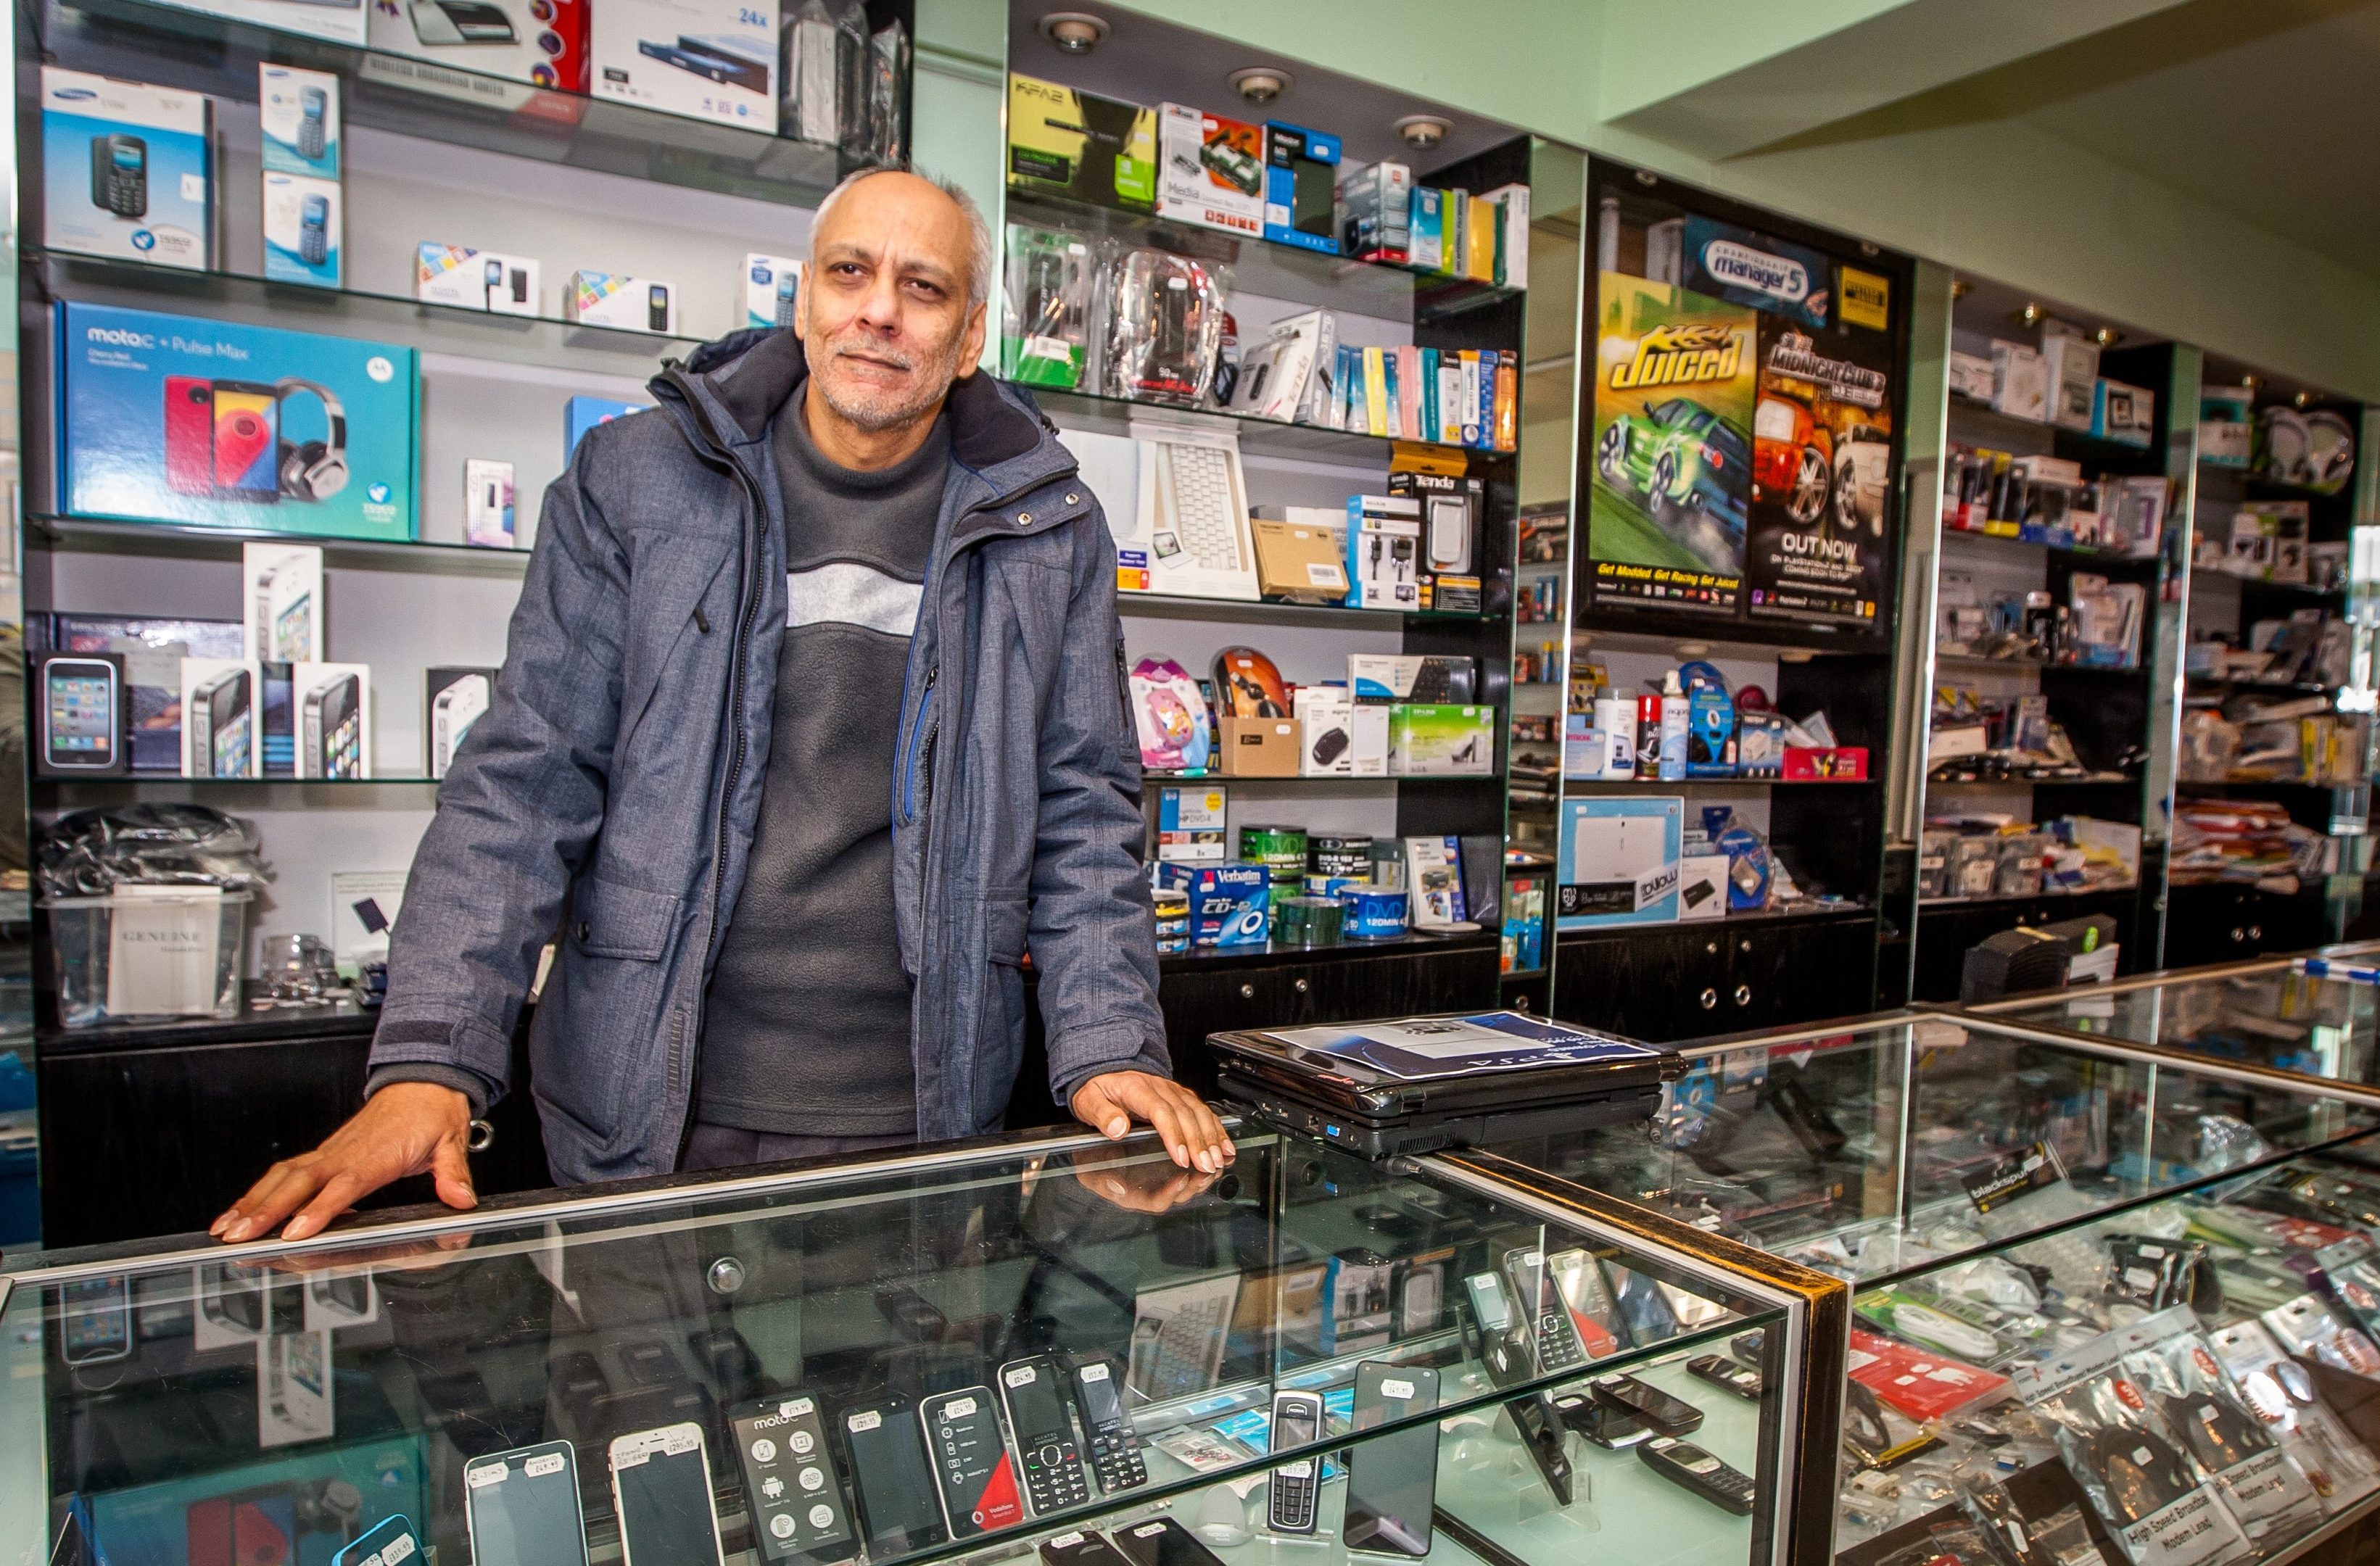 Mohammed Ali, who owns Tekno World in Perth.